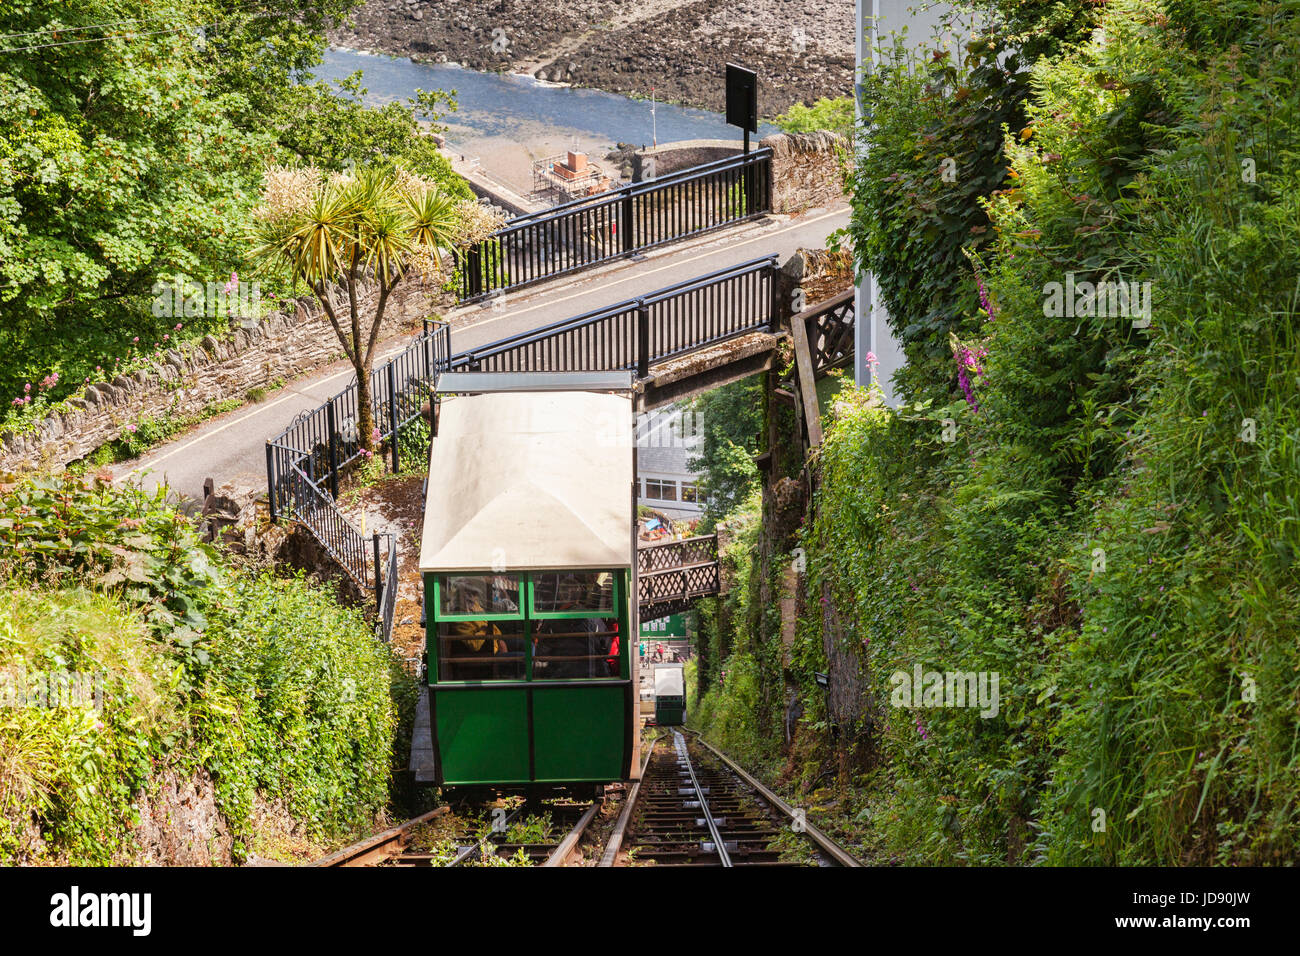 12 June 2017: Lynton, Devon, England, UK - The two cars of the Lynton and Lynmouth Cliff Railway approach one another on the steep track between the t Stock Photo